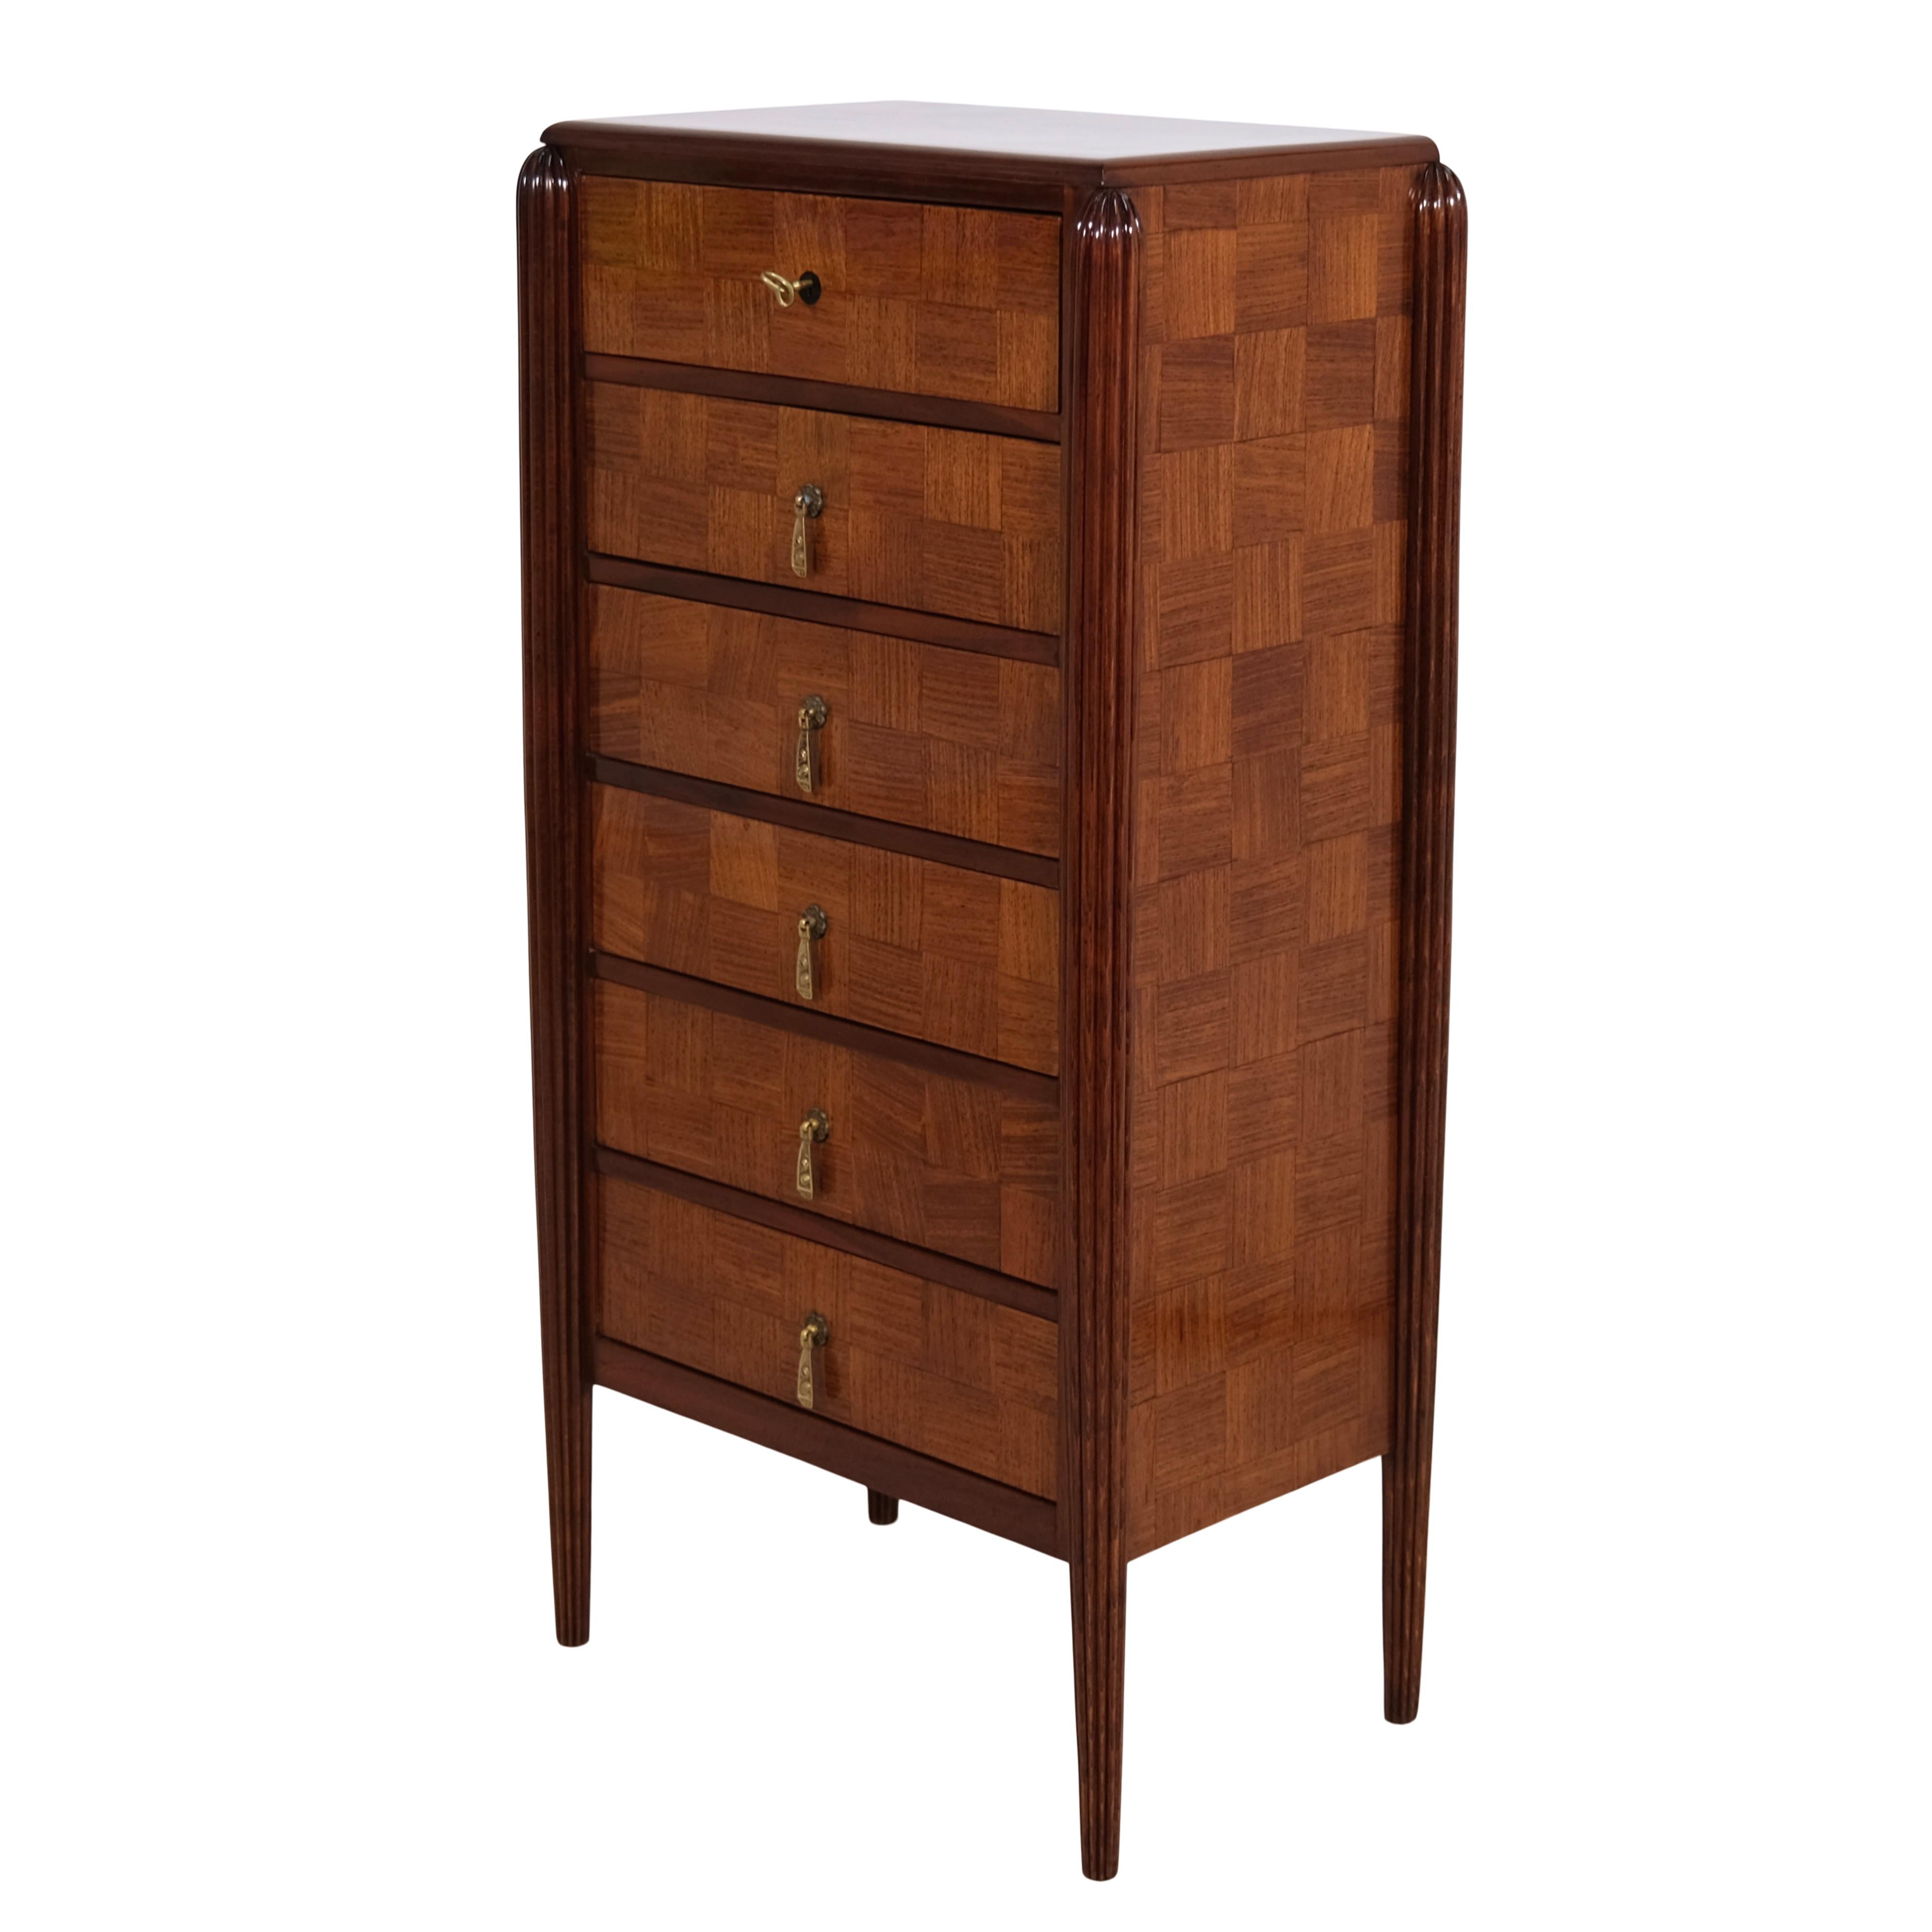 Early 20th Century Early French Art Deco High Chest Of Drawers With Six Drawers For Sale